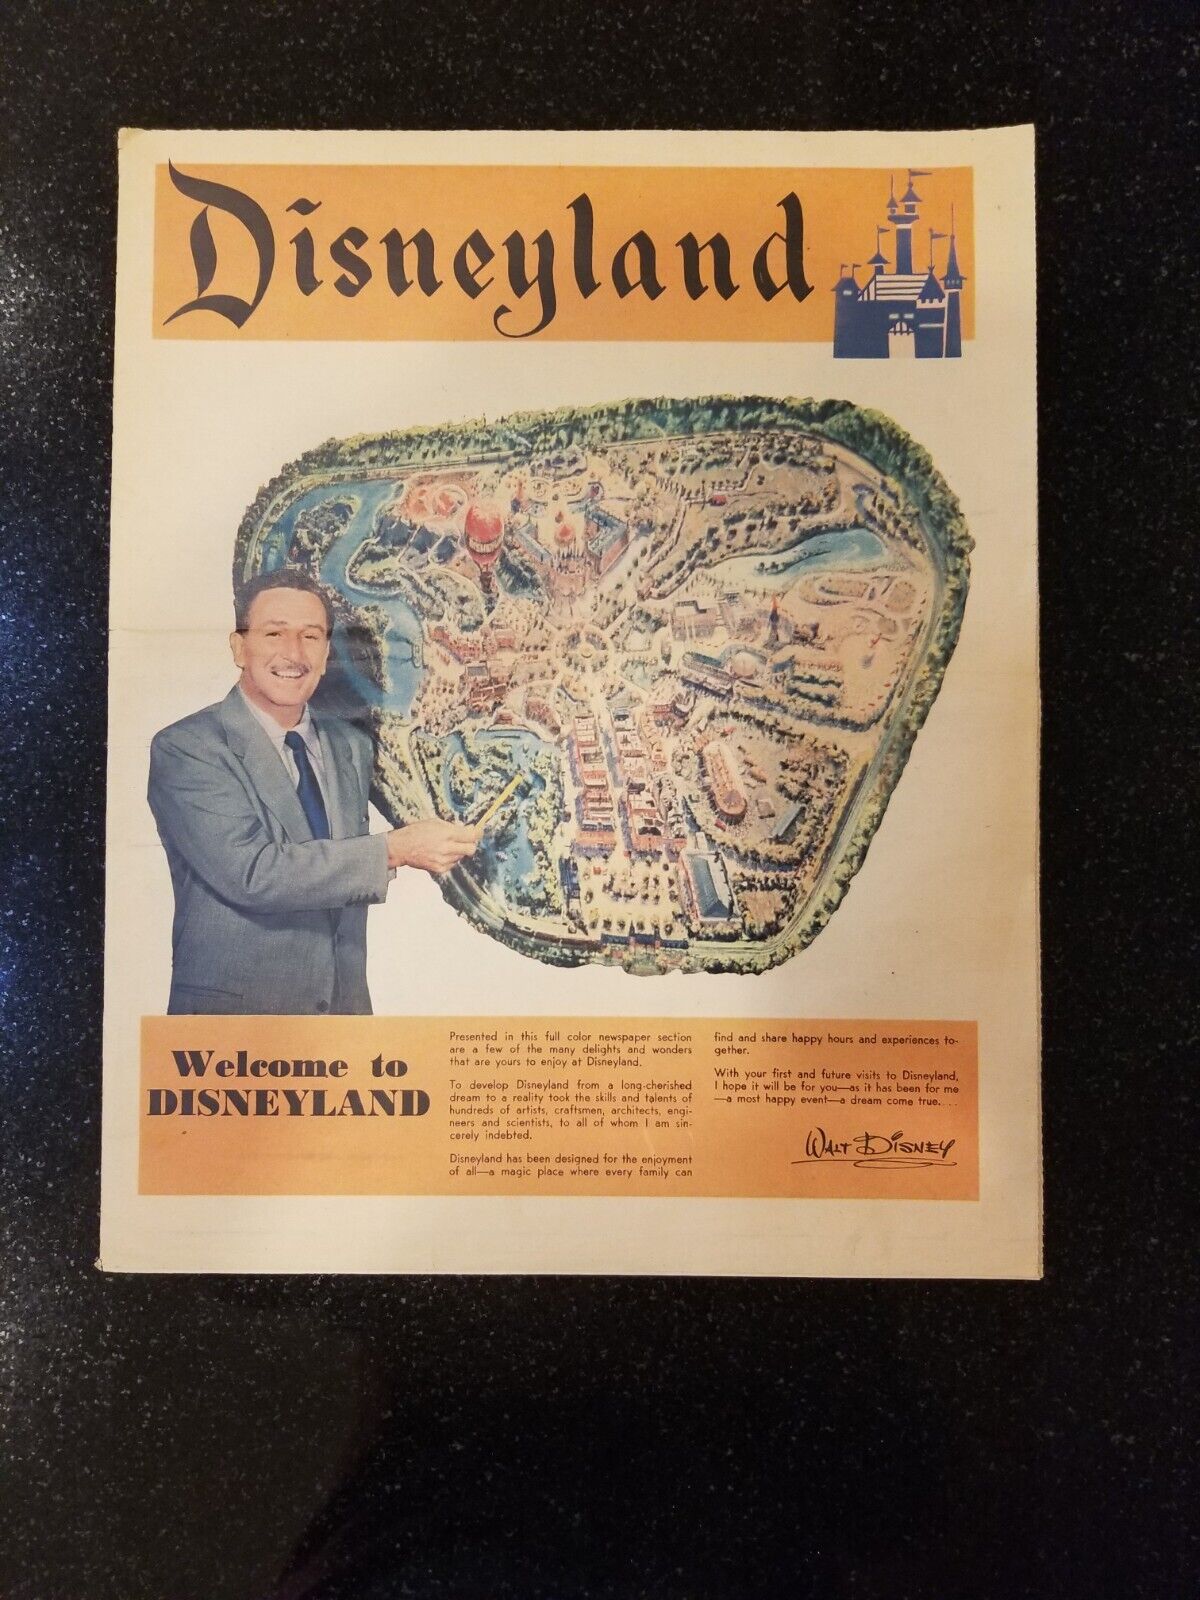 DISNEYLAND Opening Day, July 1955 Newspaper/20 PAGE TABLOID